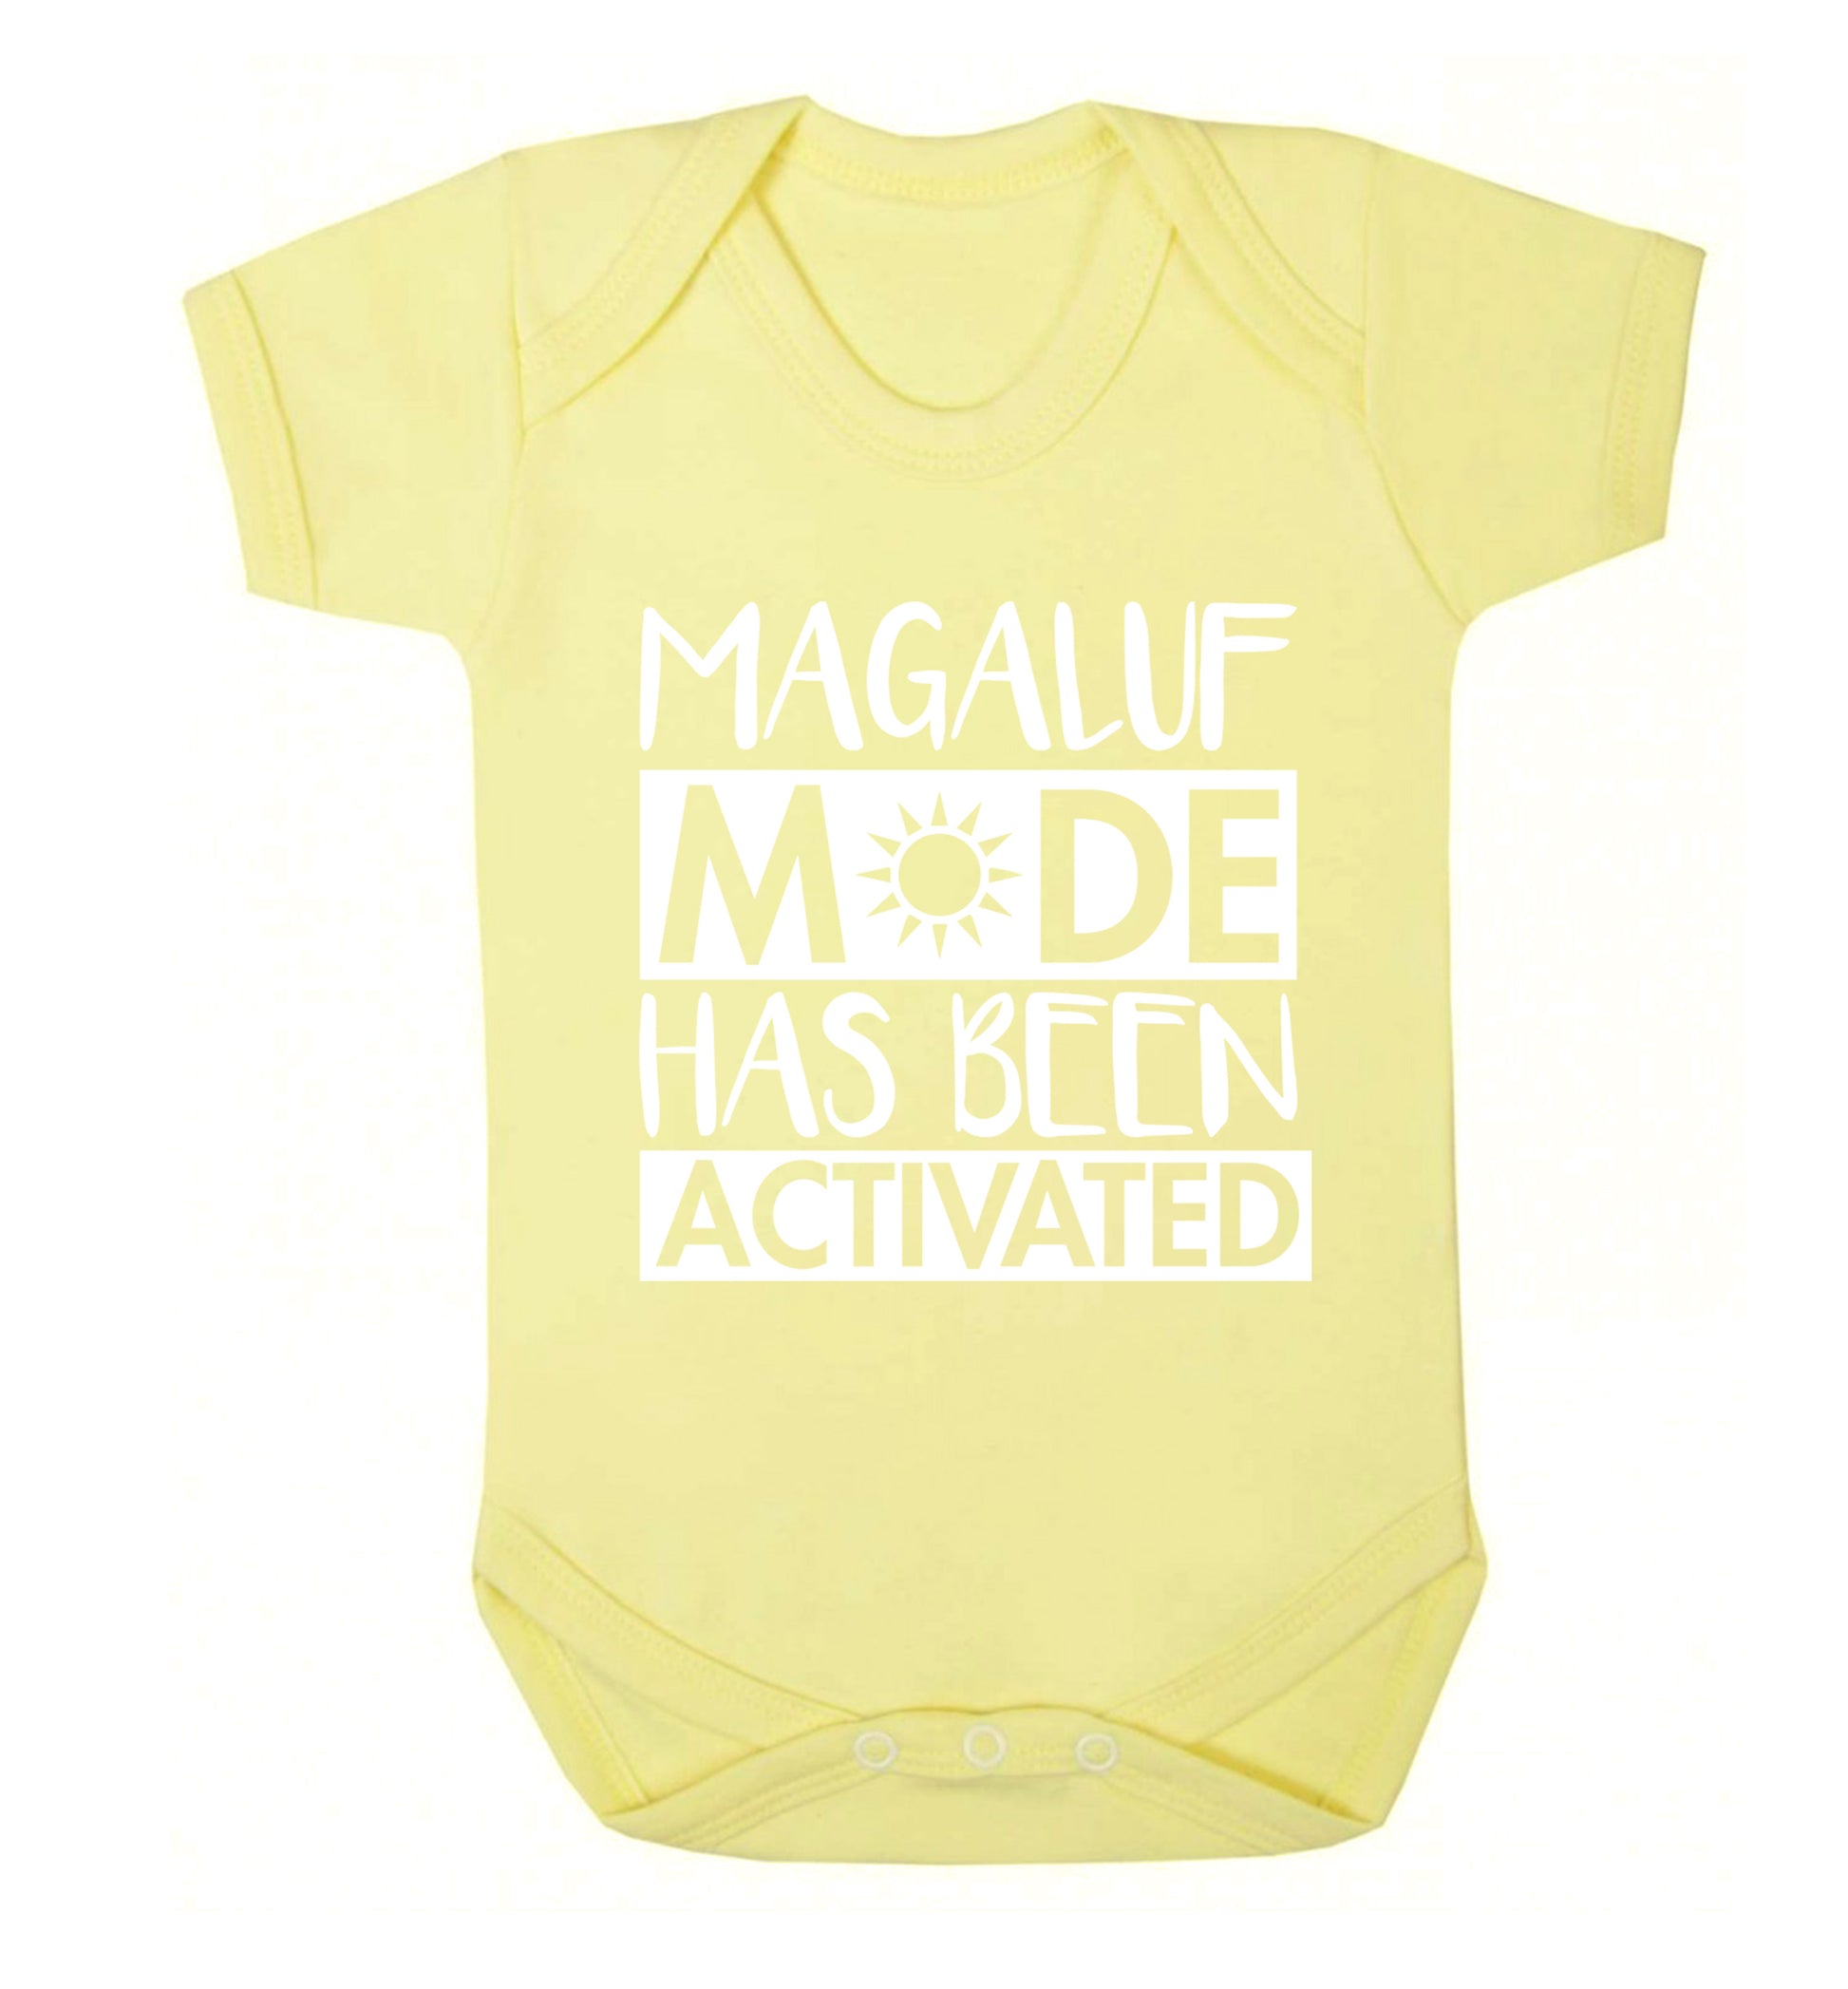 Magaluf mode has been activated Baby Vest pale yellow 18-24 months